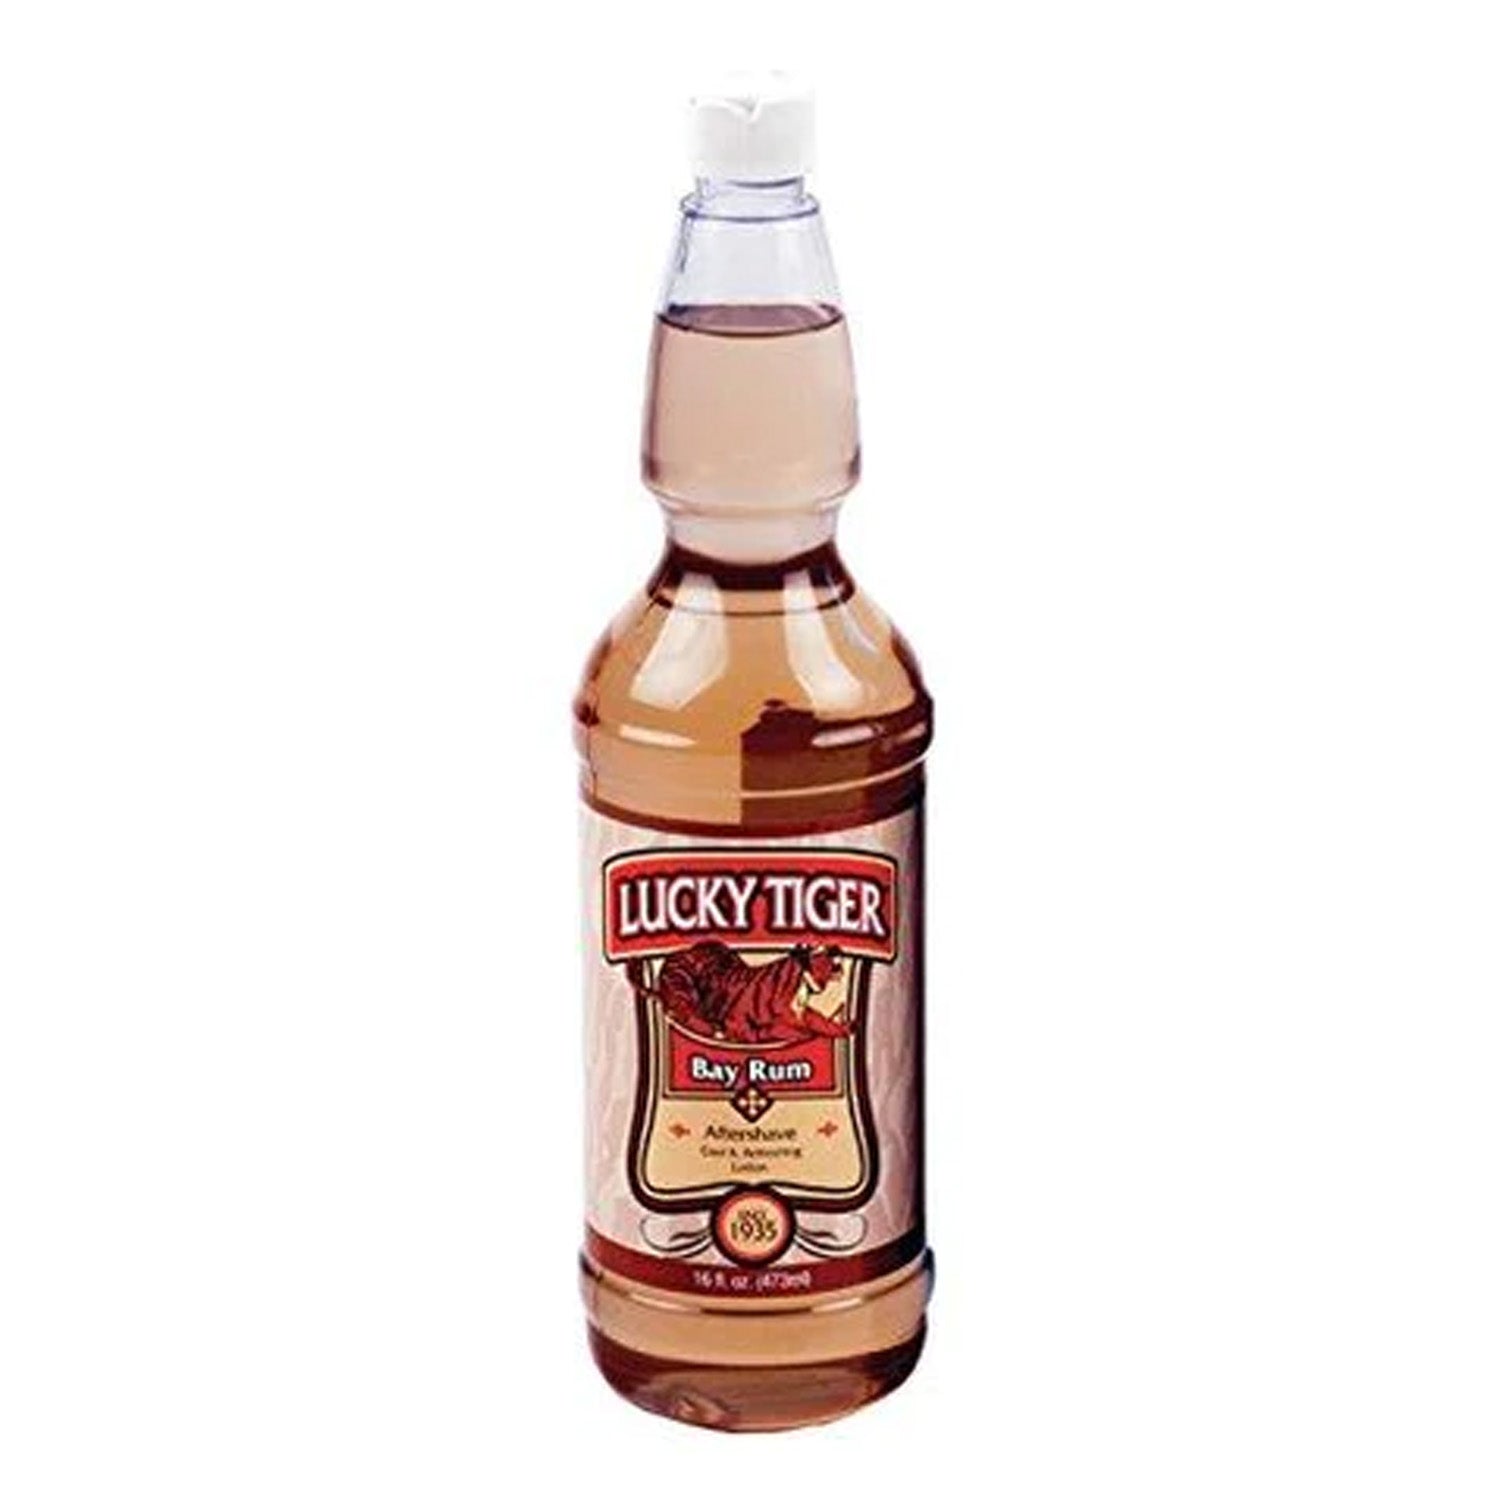 LUCKY TIGER BAY RUM AFTER SHAVE LOTION 16oz.